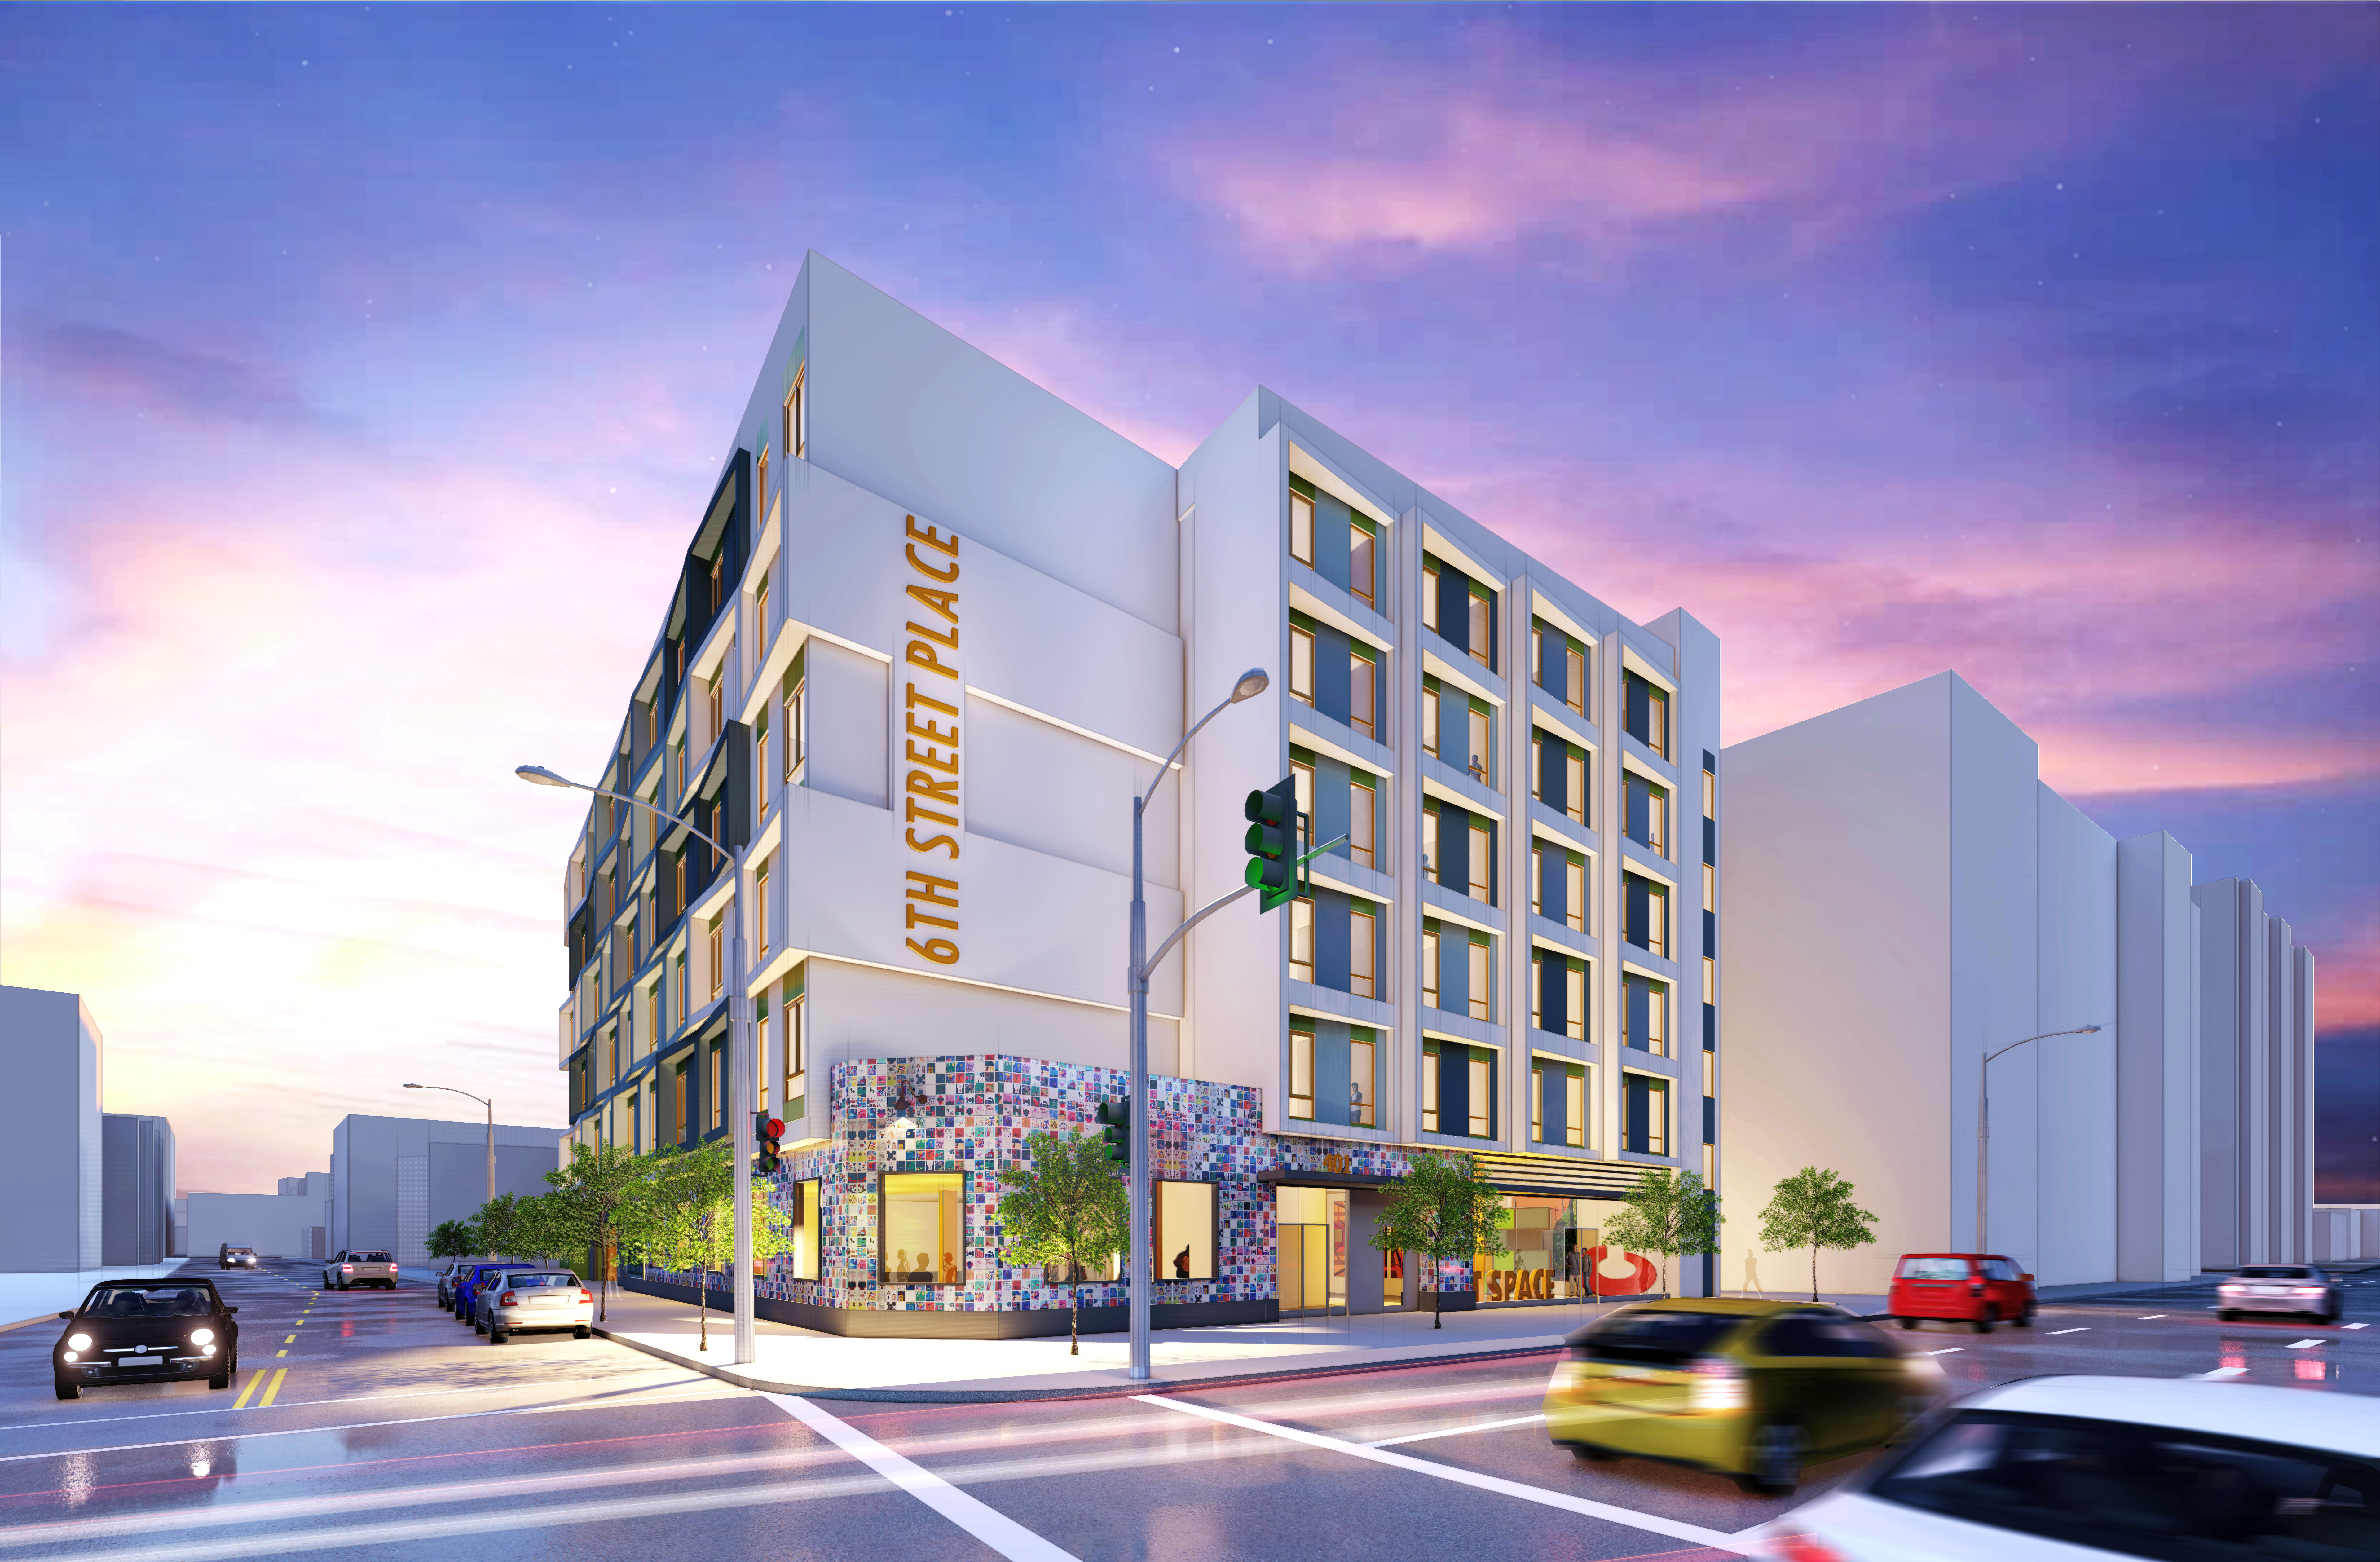 Corner Rendering, street view of building. Building is 6 stories with white and blue facade.